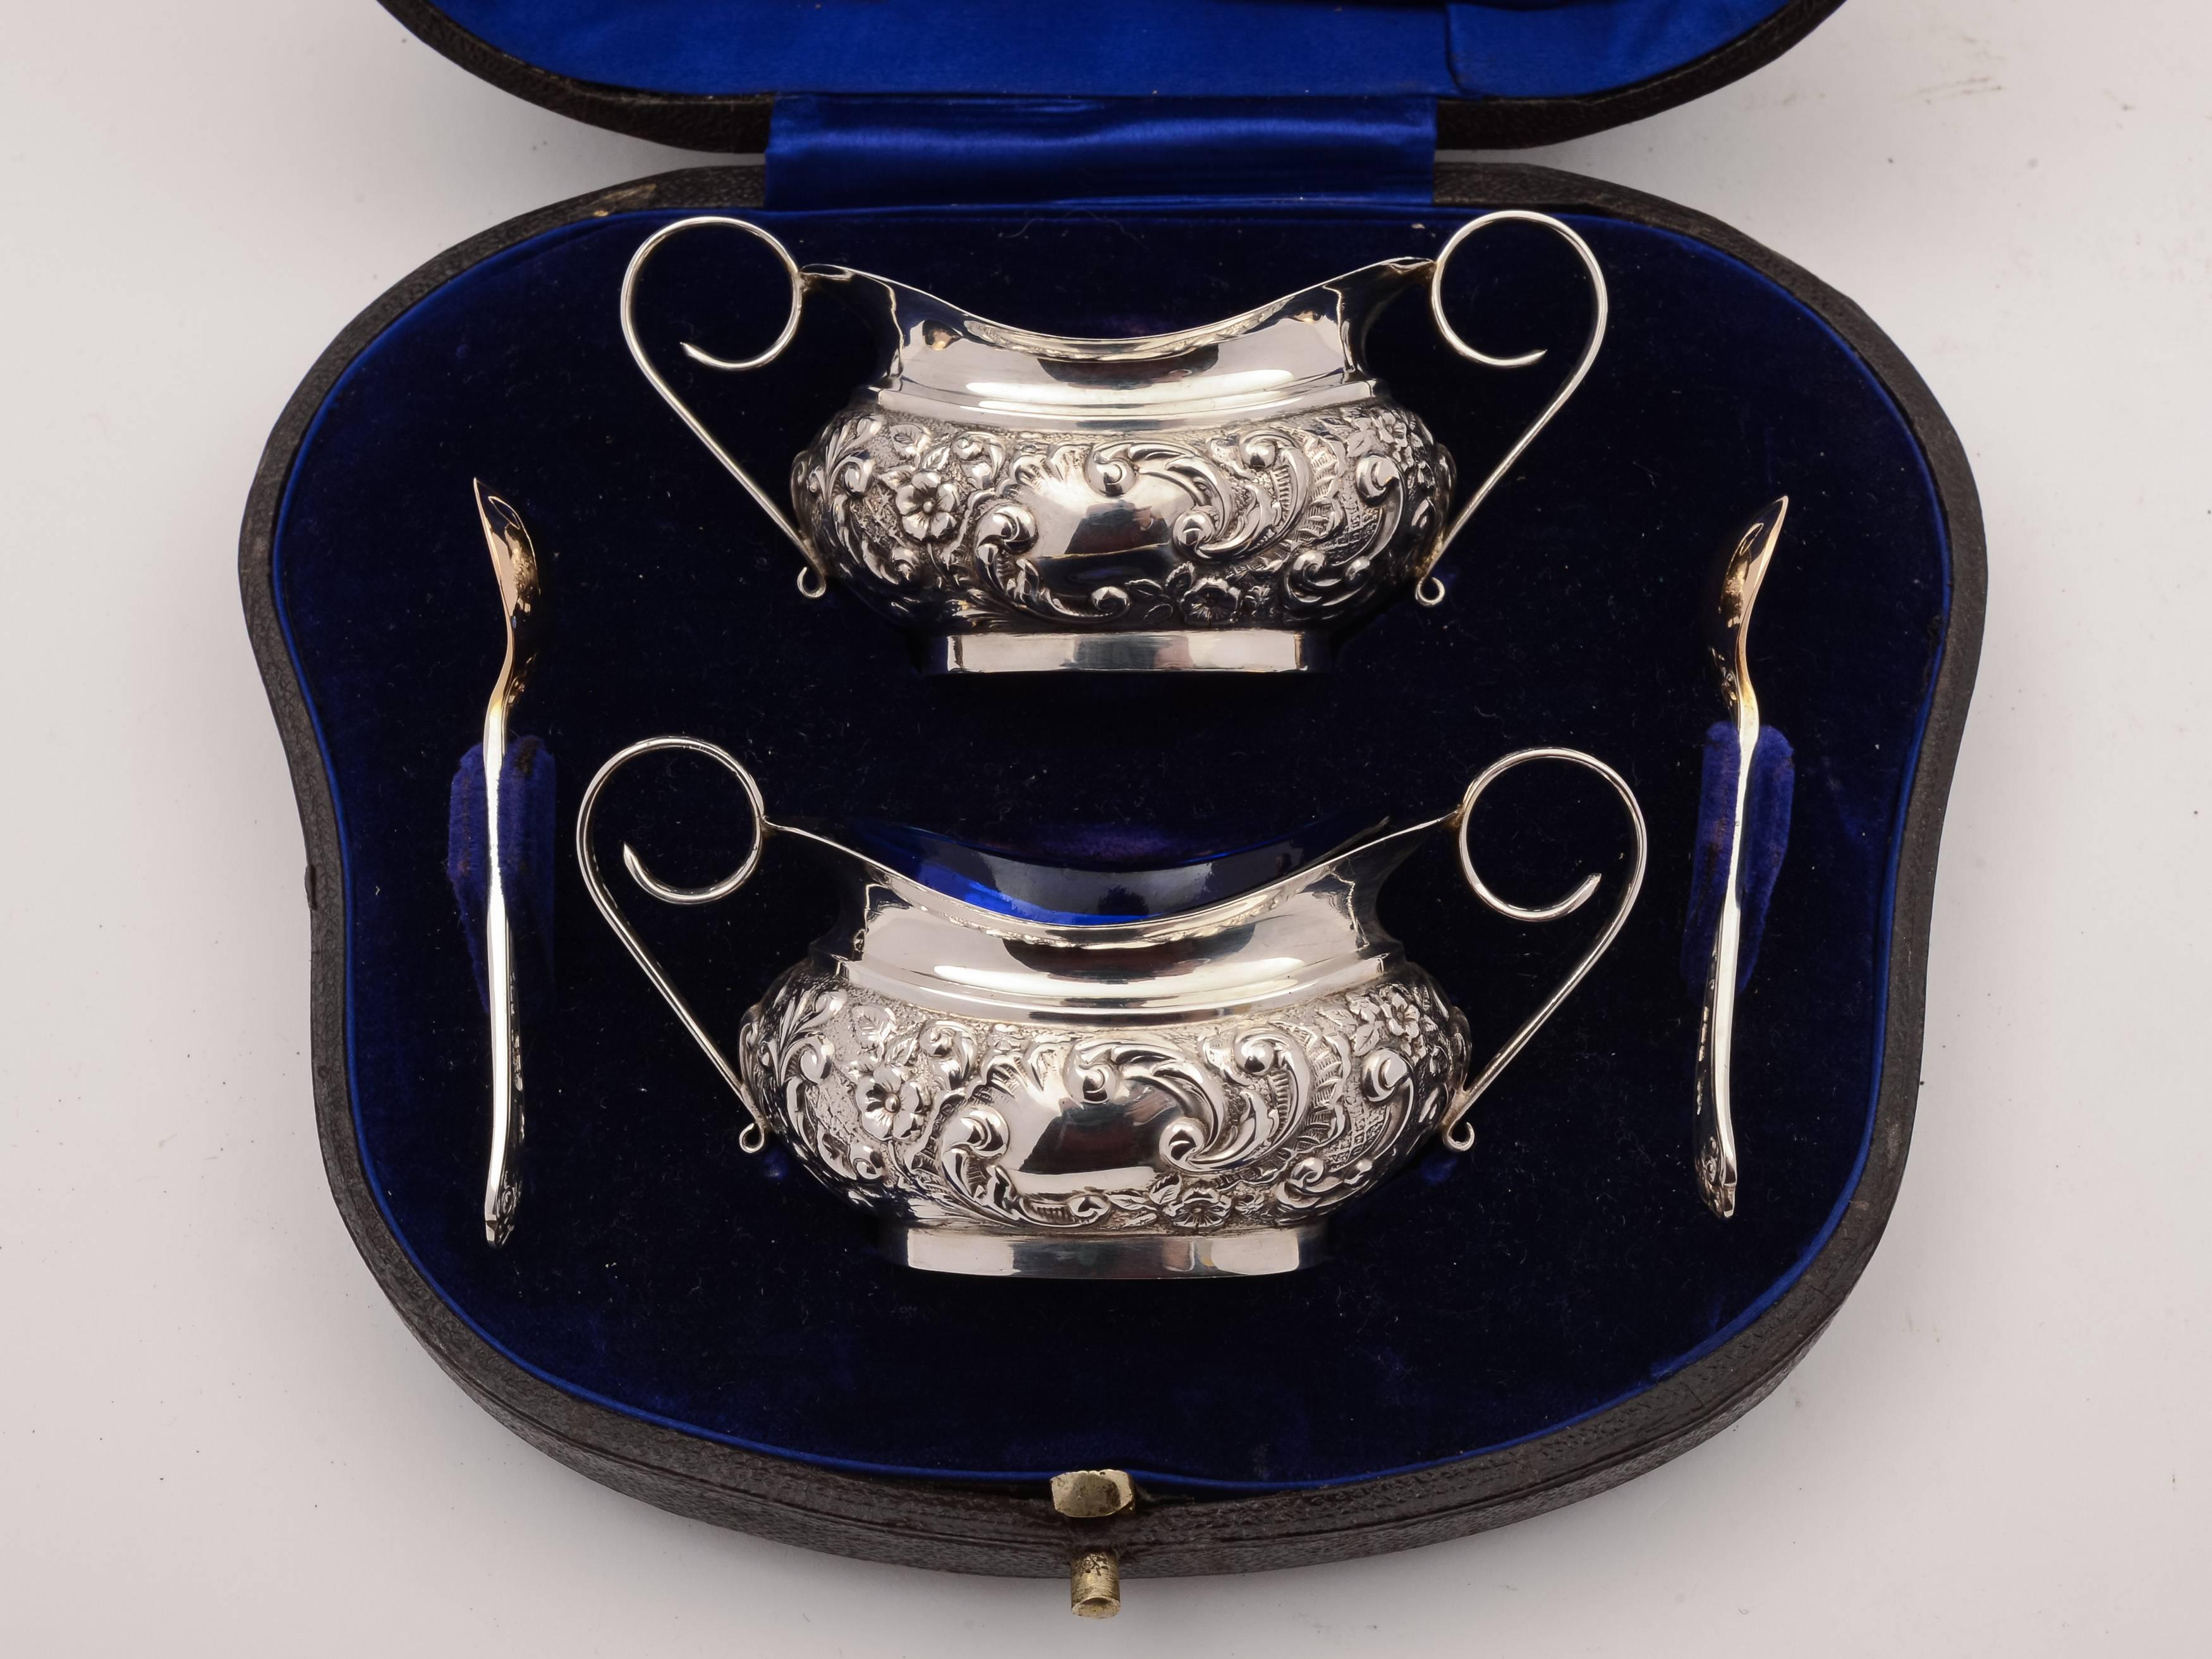 A lovely pair of English Edwardian silver salts with embossed decoration and scroll handles, come with silver salt spoons and original gilt interior with cobalt blue glass liners. Presented in original blue velvet and silk lined case. Hallmarked